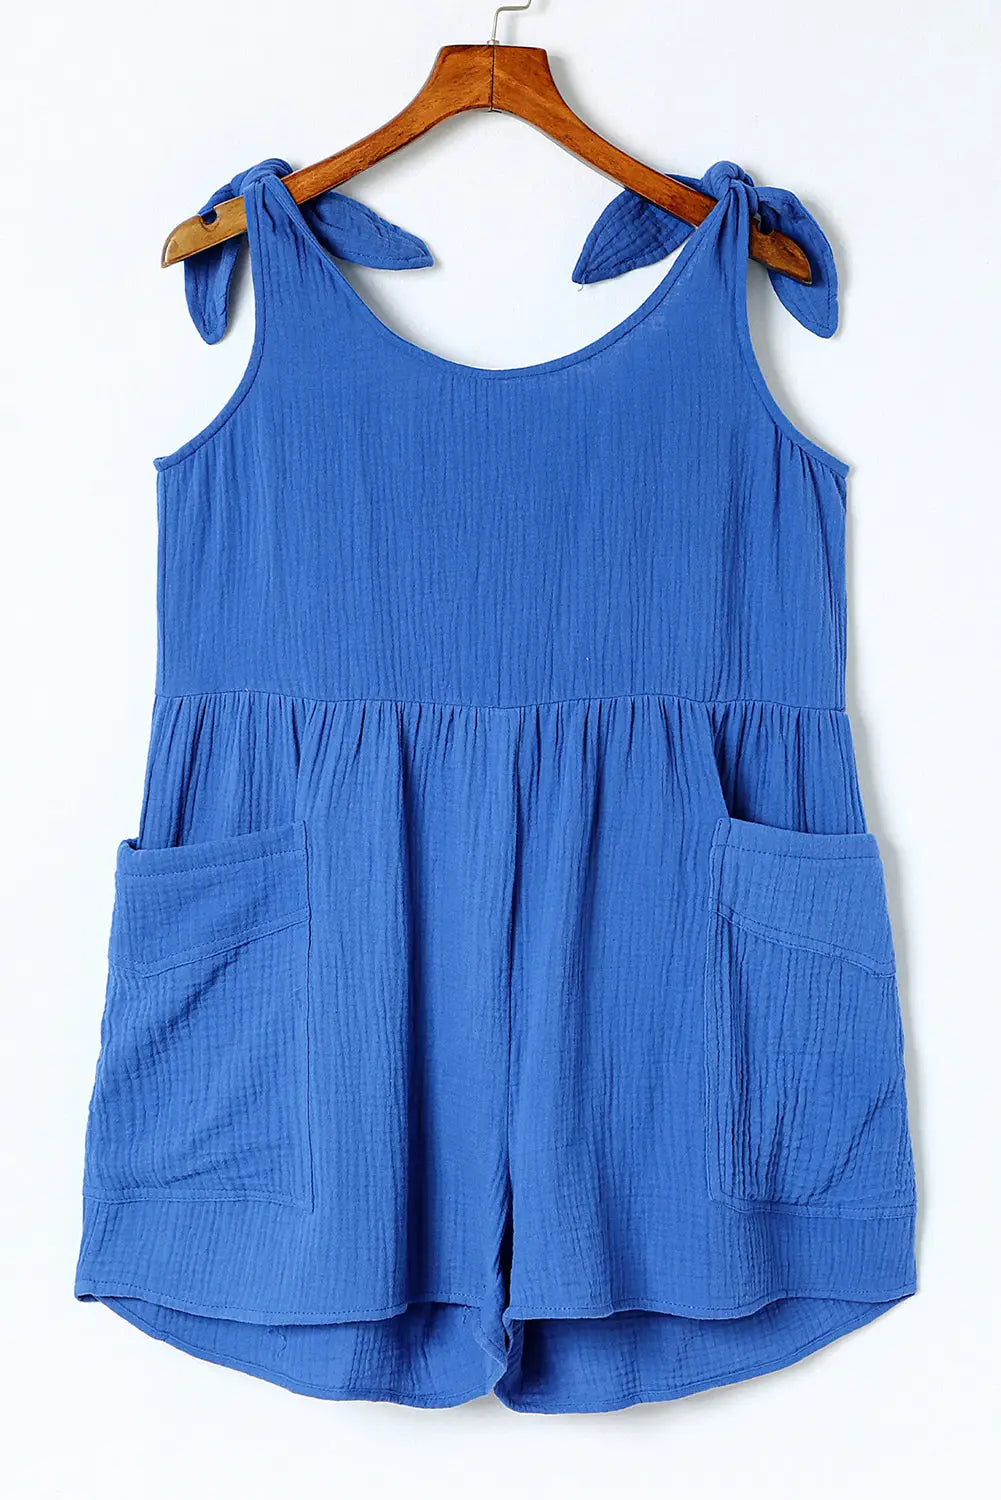 Blue textured knotted straps high waist wide leg romper - jumpsuits & rompers